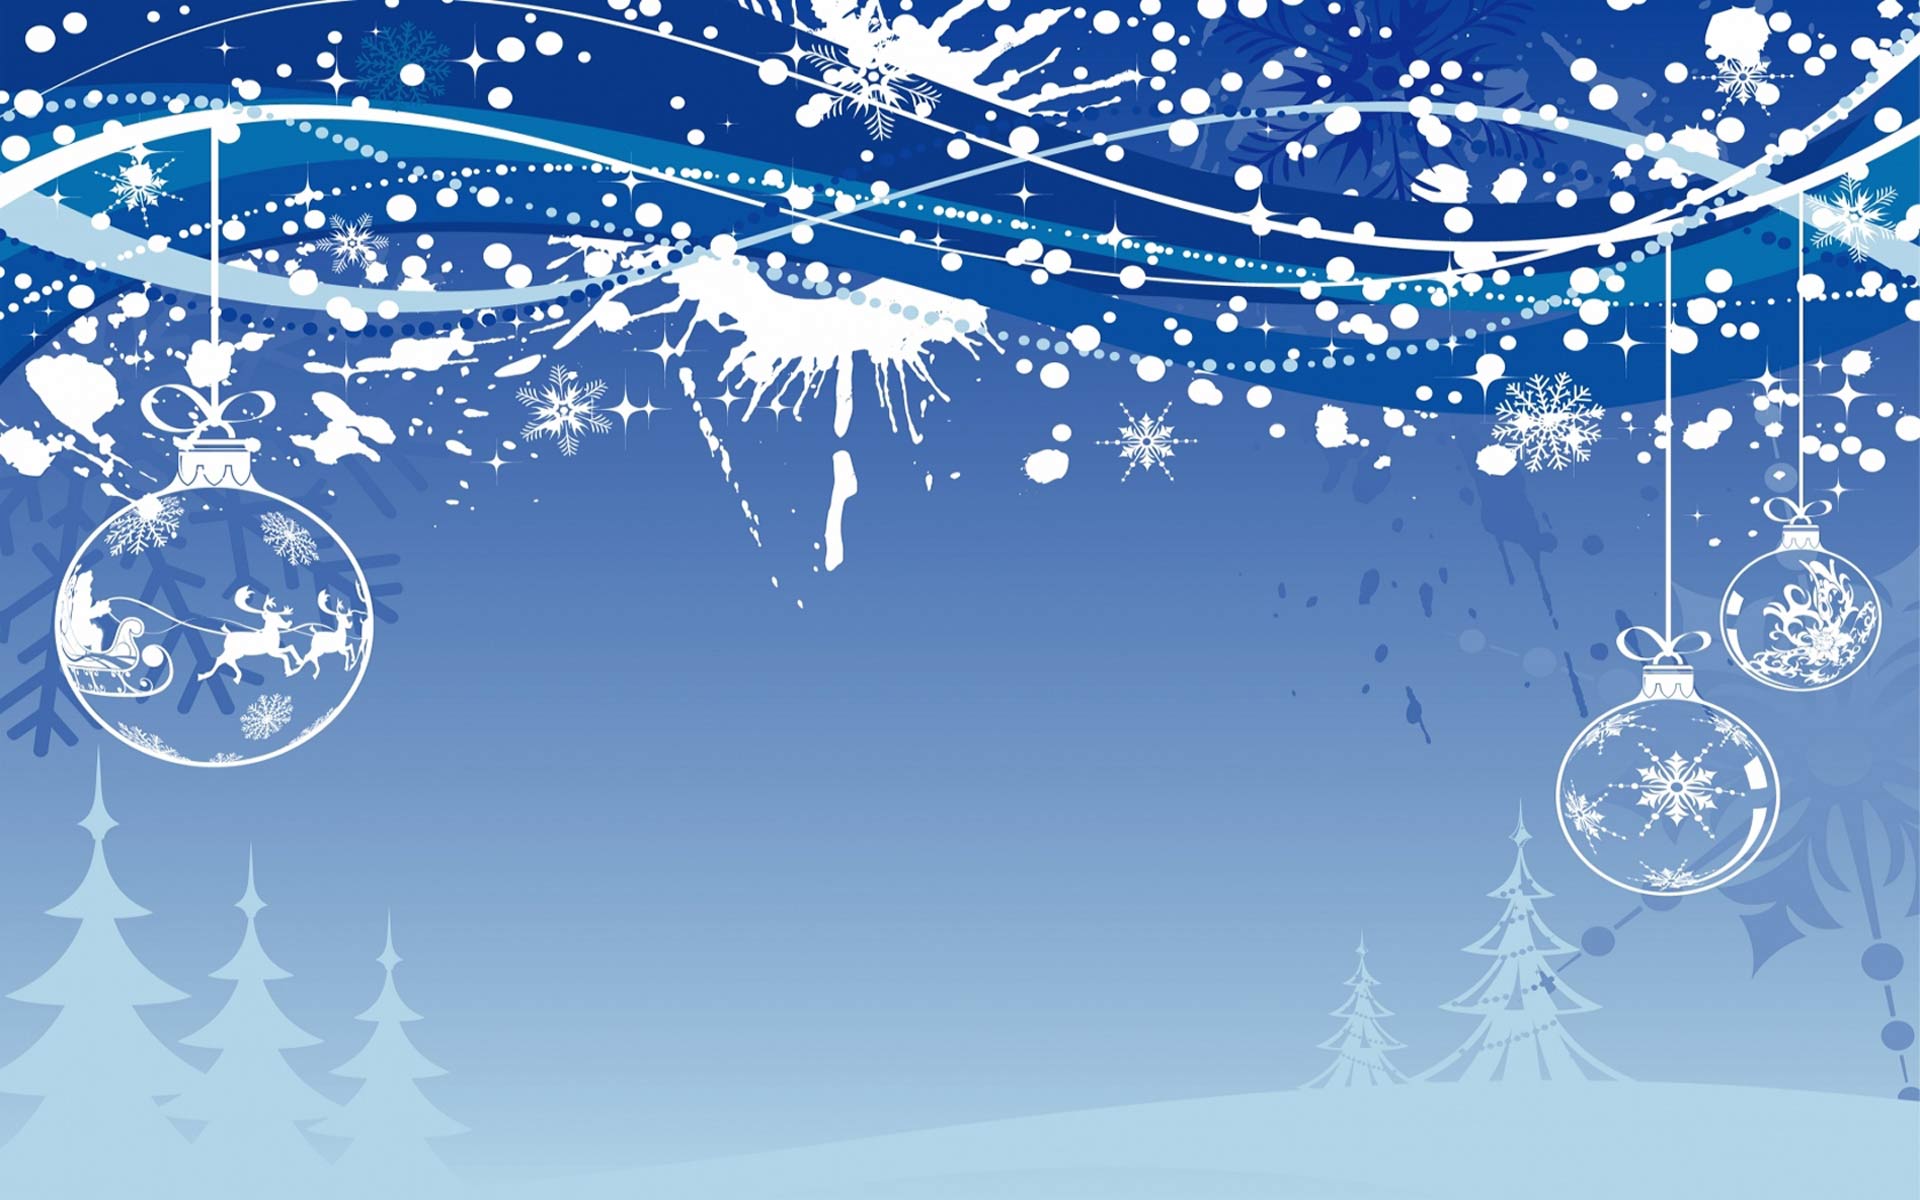 free Christmas wallpaper for computer screen - photos, images ...